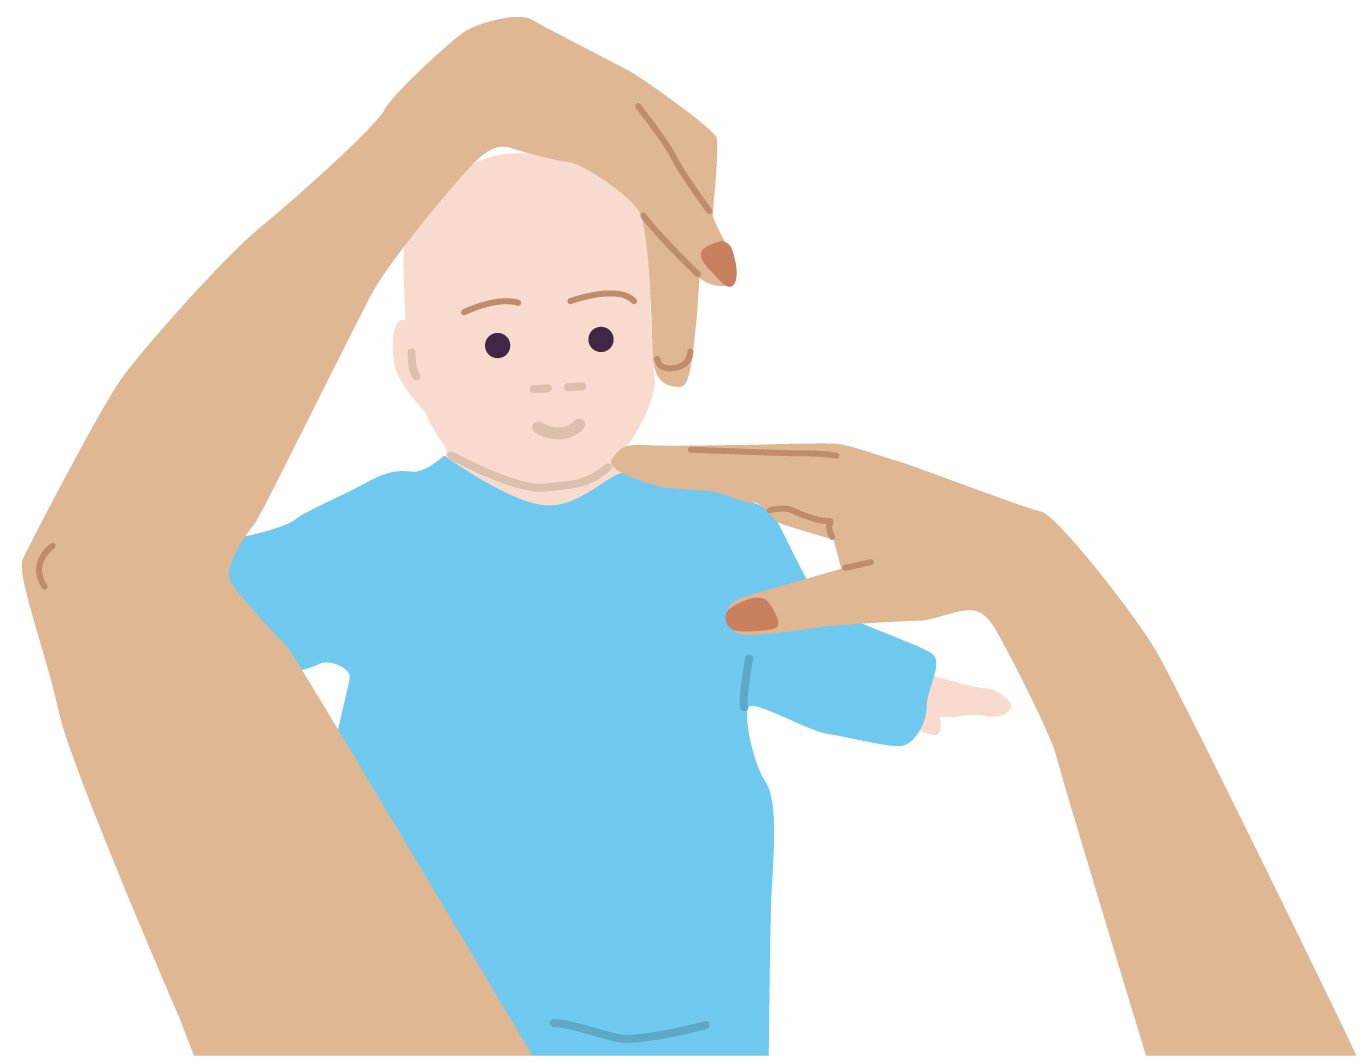 Illustration of baby laid on their back with someone holding their shoulder and head